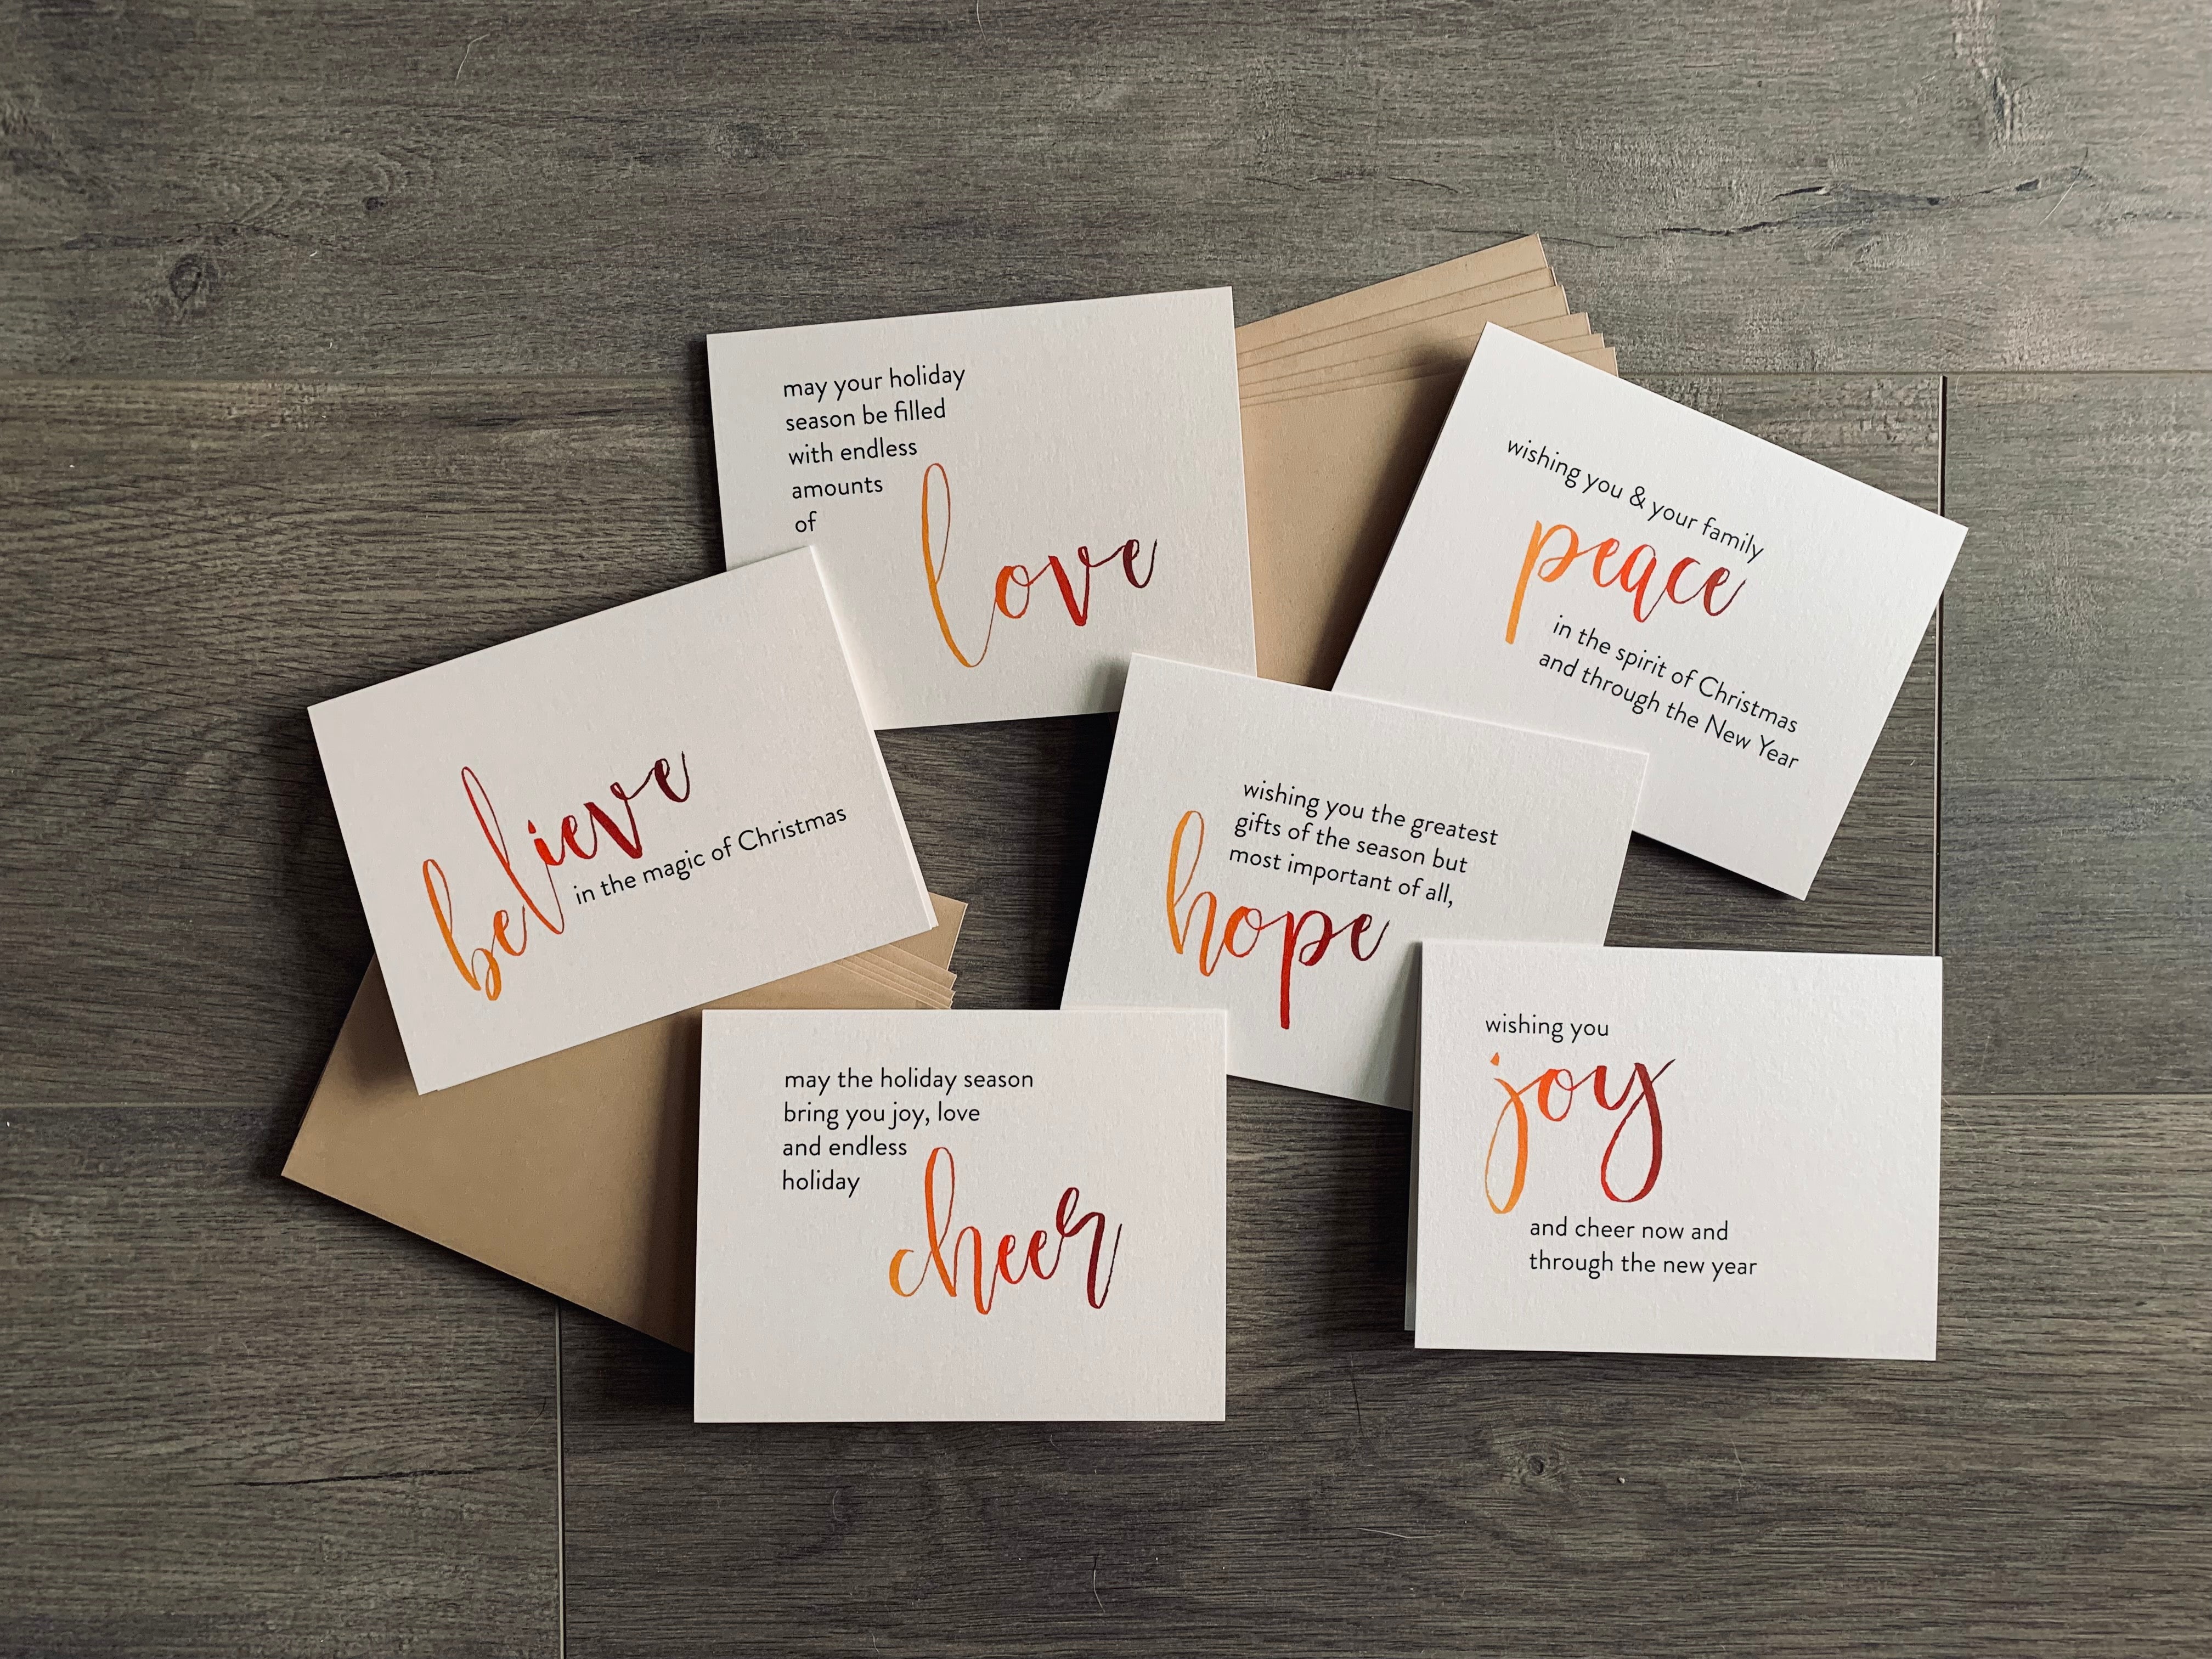 The 6 cards from the Meaning of Christmas collection lie on a gray wooden background with two stacks of kraft envelopes. The cards are printed on a cream pearlized paper. Each card has a large script word in an ombre of orange to burgundy. The rest of the sentiment is in black sans serif font.